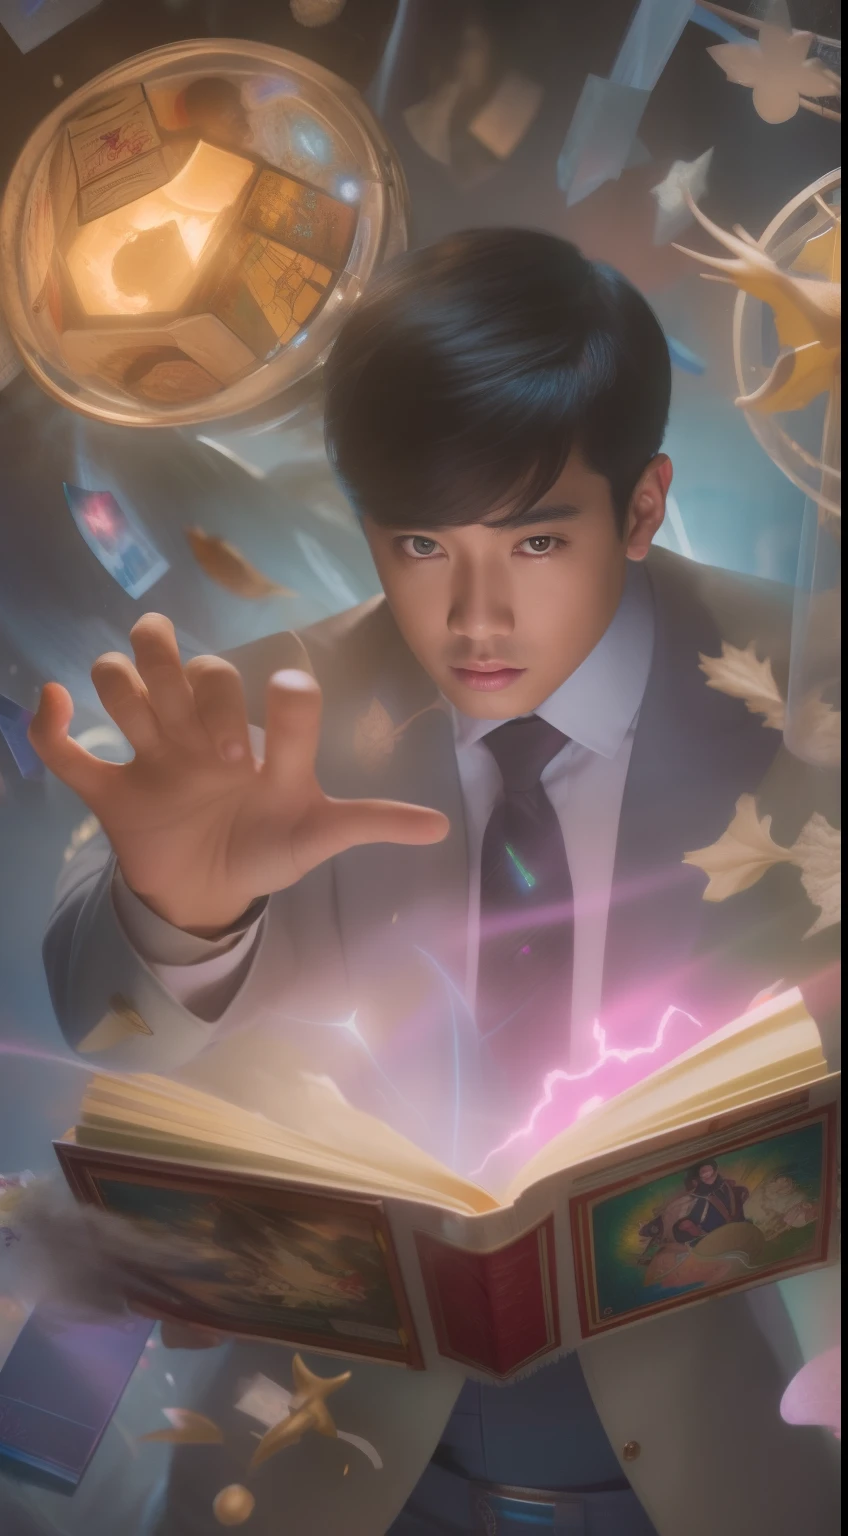 A detailed painting depicting an Asian man in a suit surrounded by a flurry of glowing magic cards and the book Dungeons and Dragons in the center.